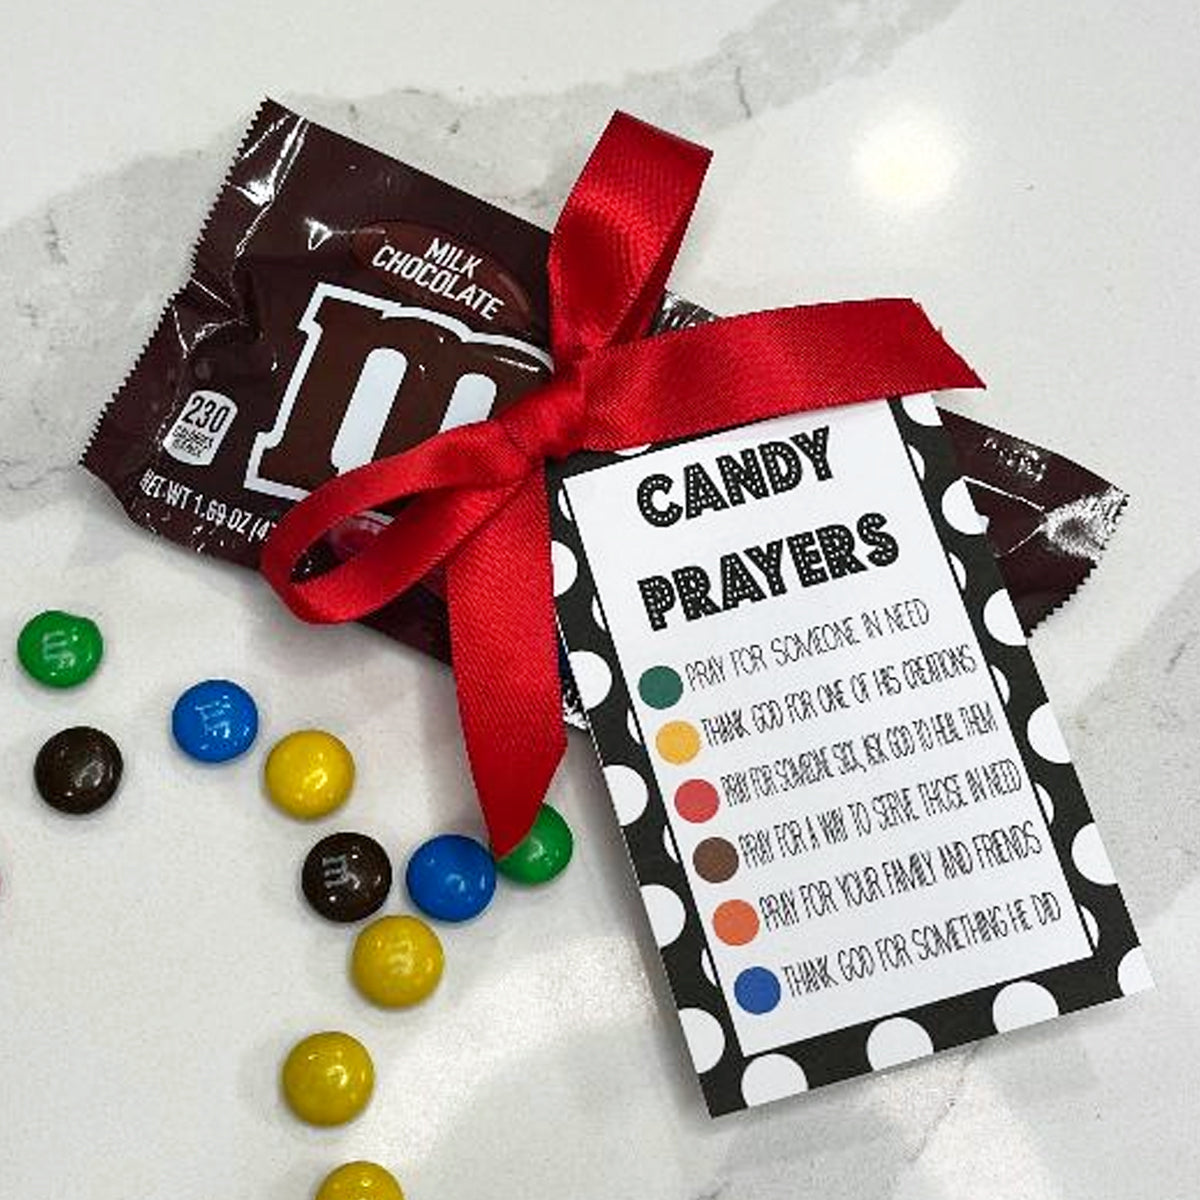 Candy Prayer Instant Download Tag